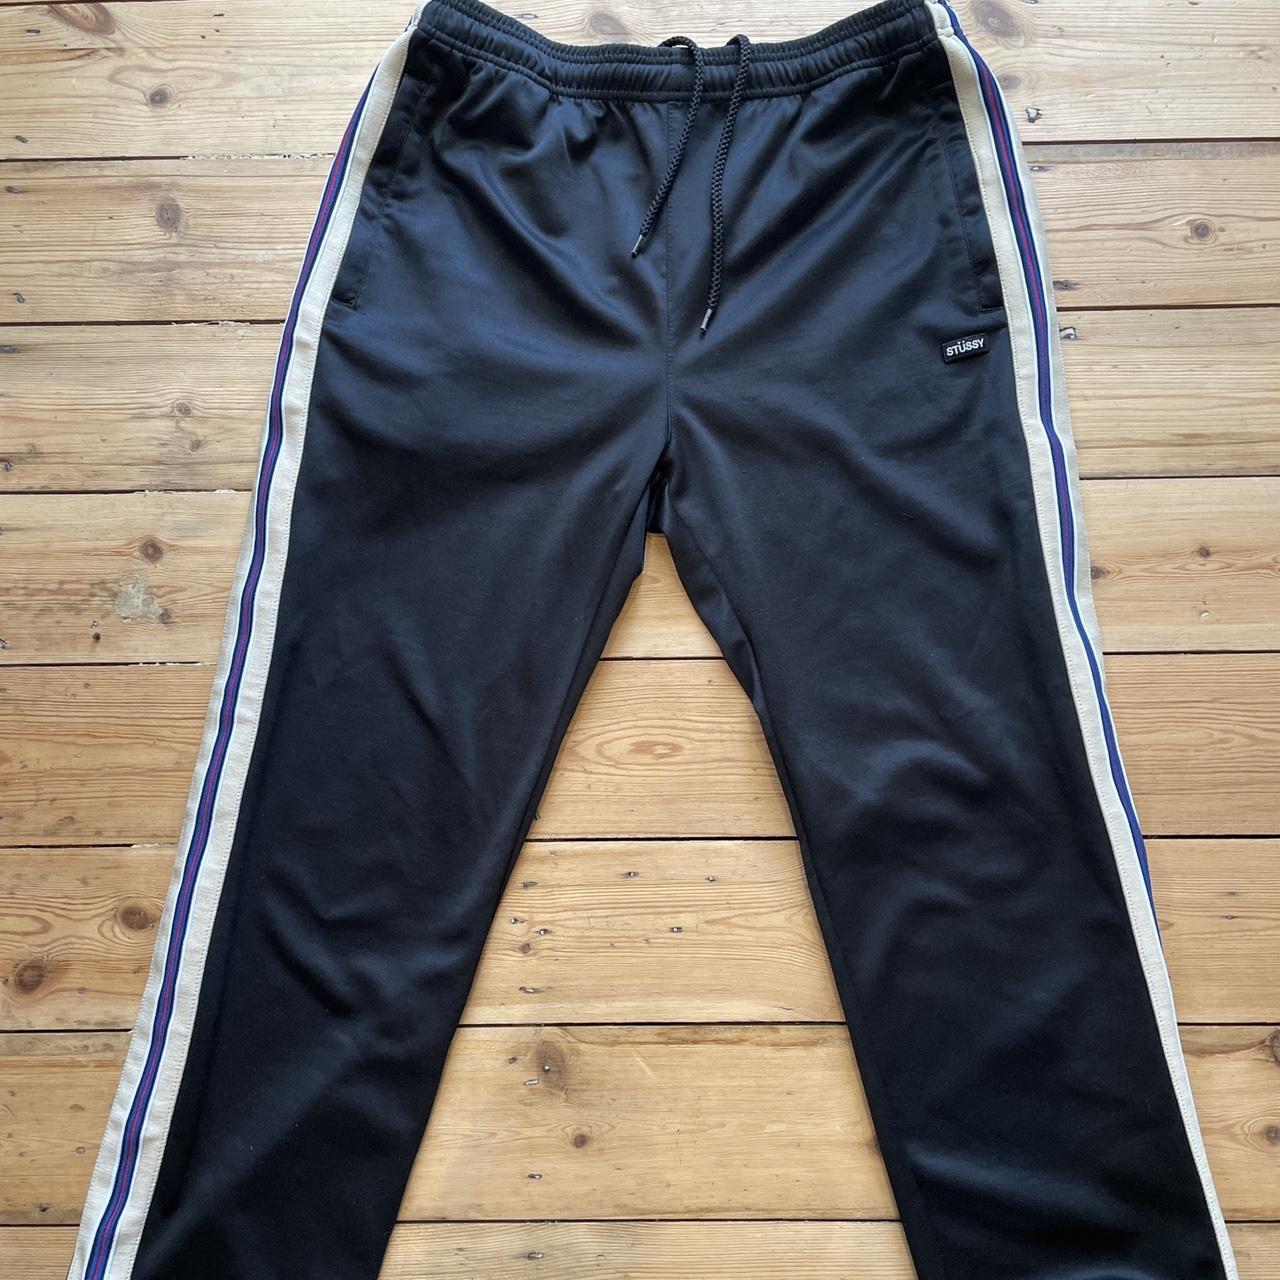 Stussy track pants/joggers. Great conditions, hardly... - Depop